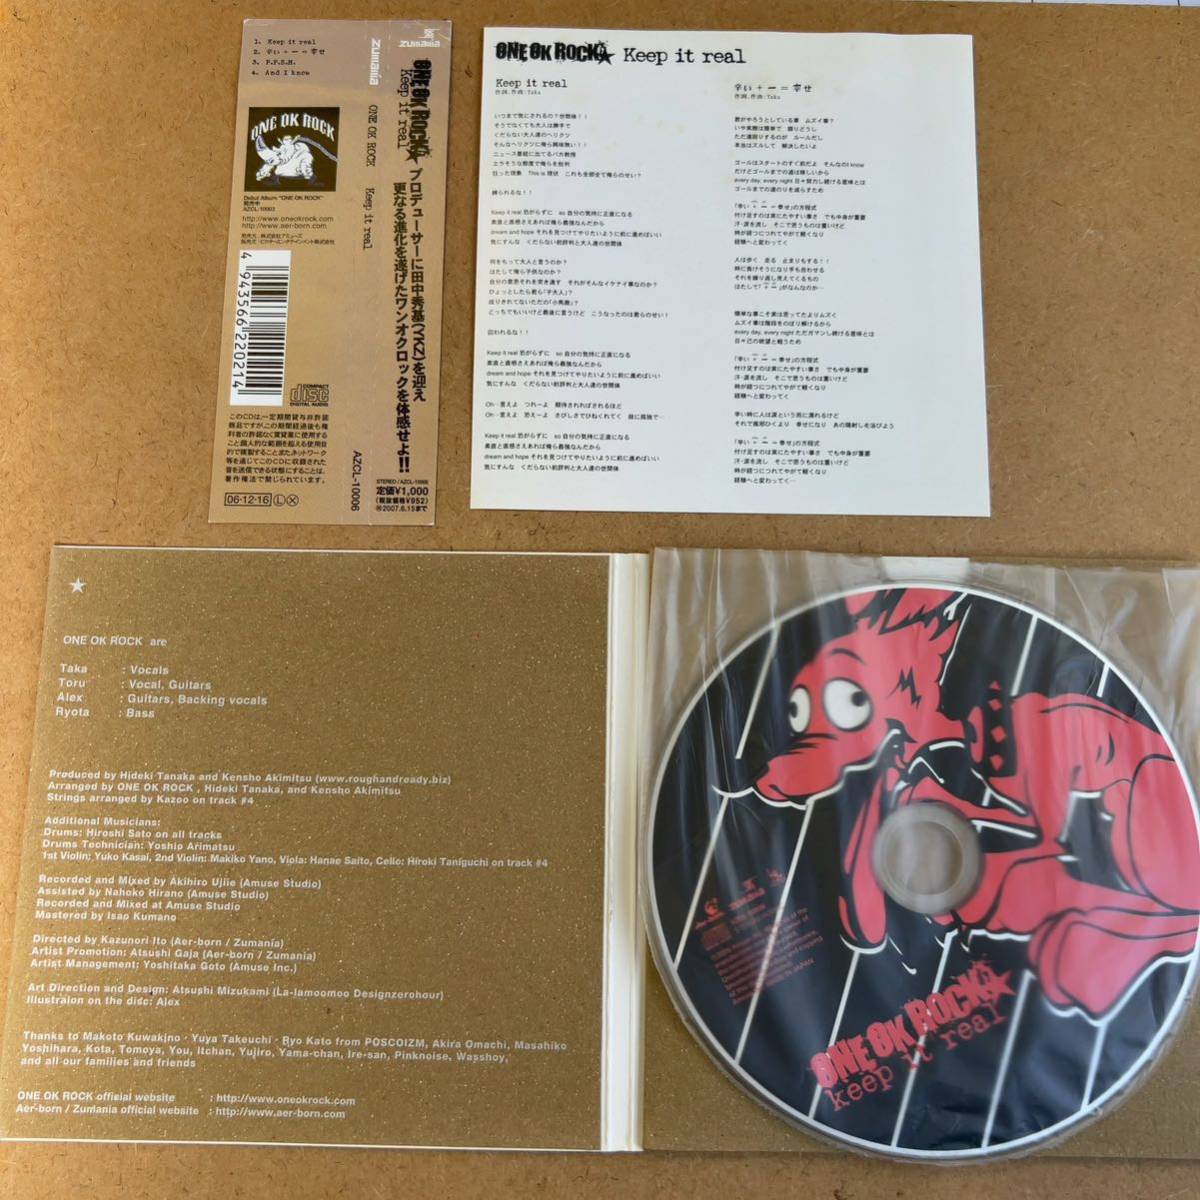  free shipping *ONE OK ROCK[Keep it real] indies record CD* with belt * beautiful goods * one ok * rare record *325